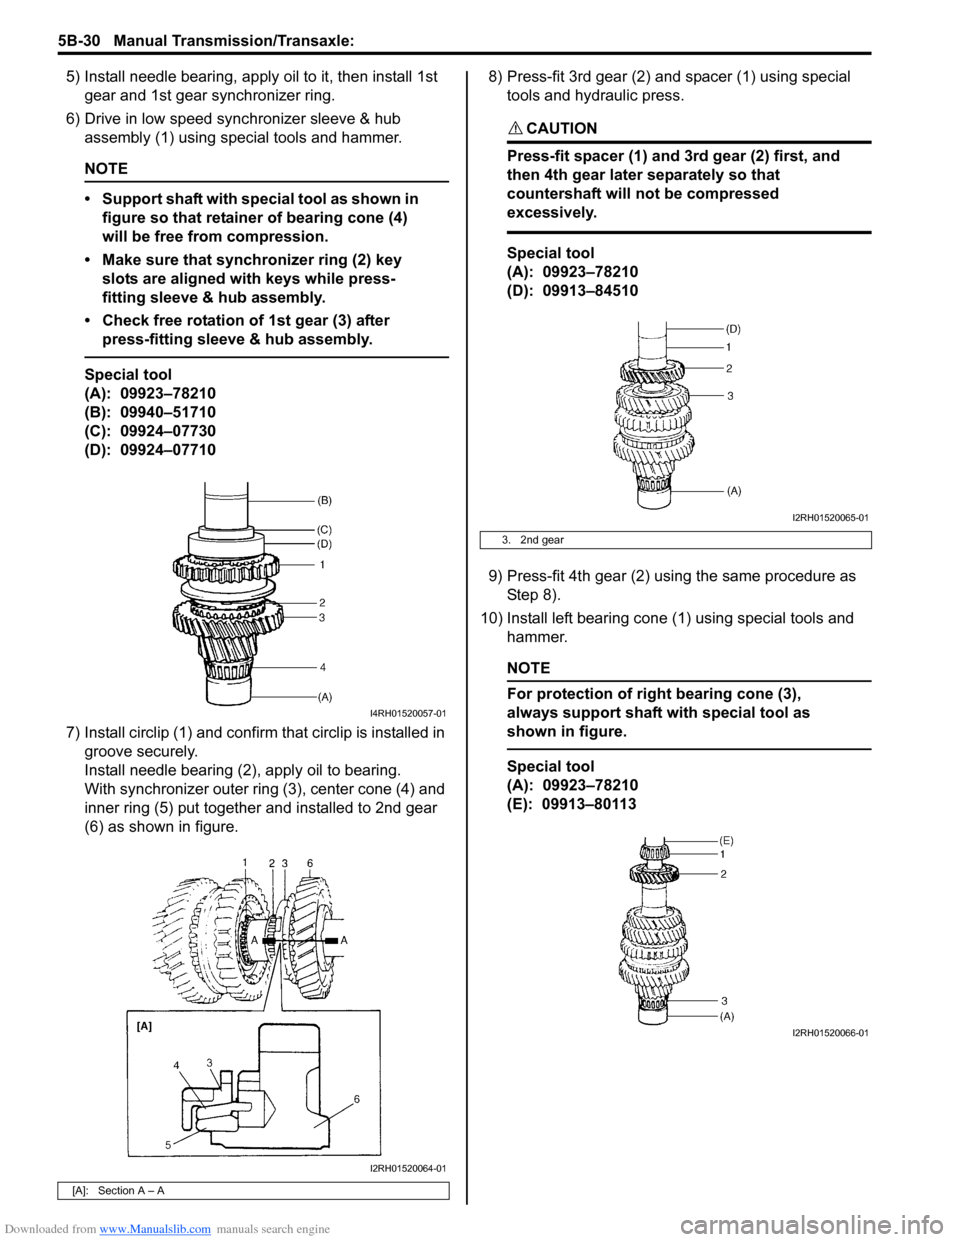 SUZUKI SWIFT 2006 2.G Service Workshop Manual Downloaded from www.Manualslib.com manuals search engine 5B-30 Manual Transmission/Transaxle: 
5) Install needle bearing, apply oil to it, then install 1st gear and 1st gear synchronizer ring.
6) Driv